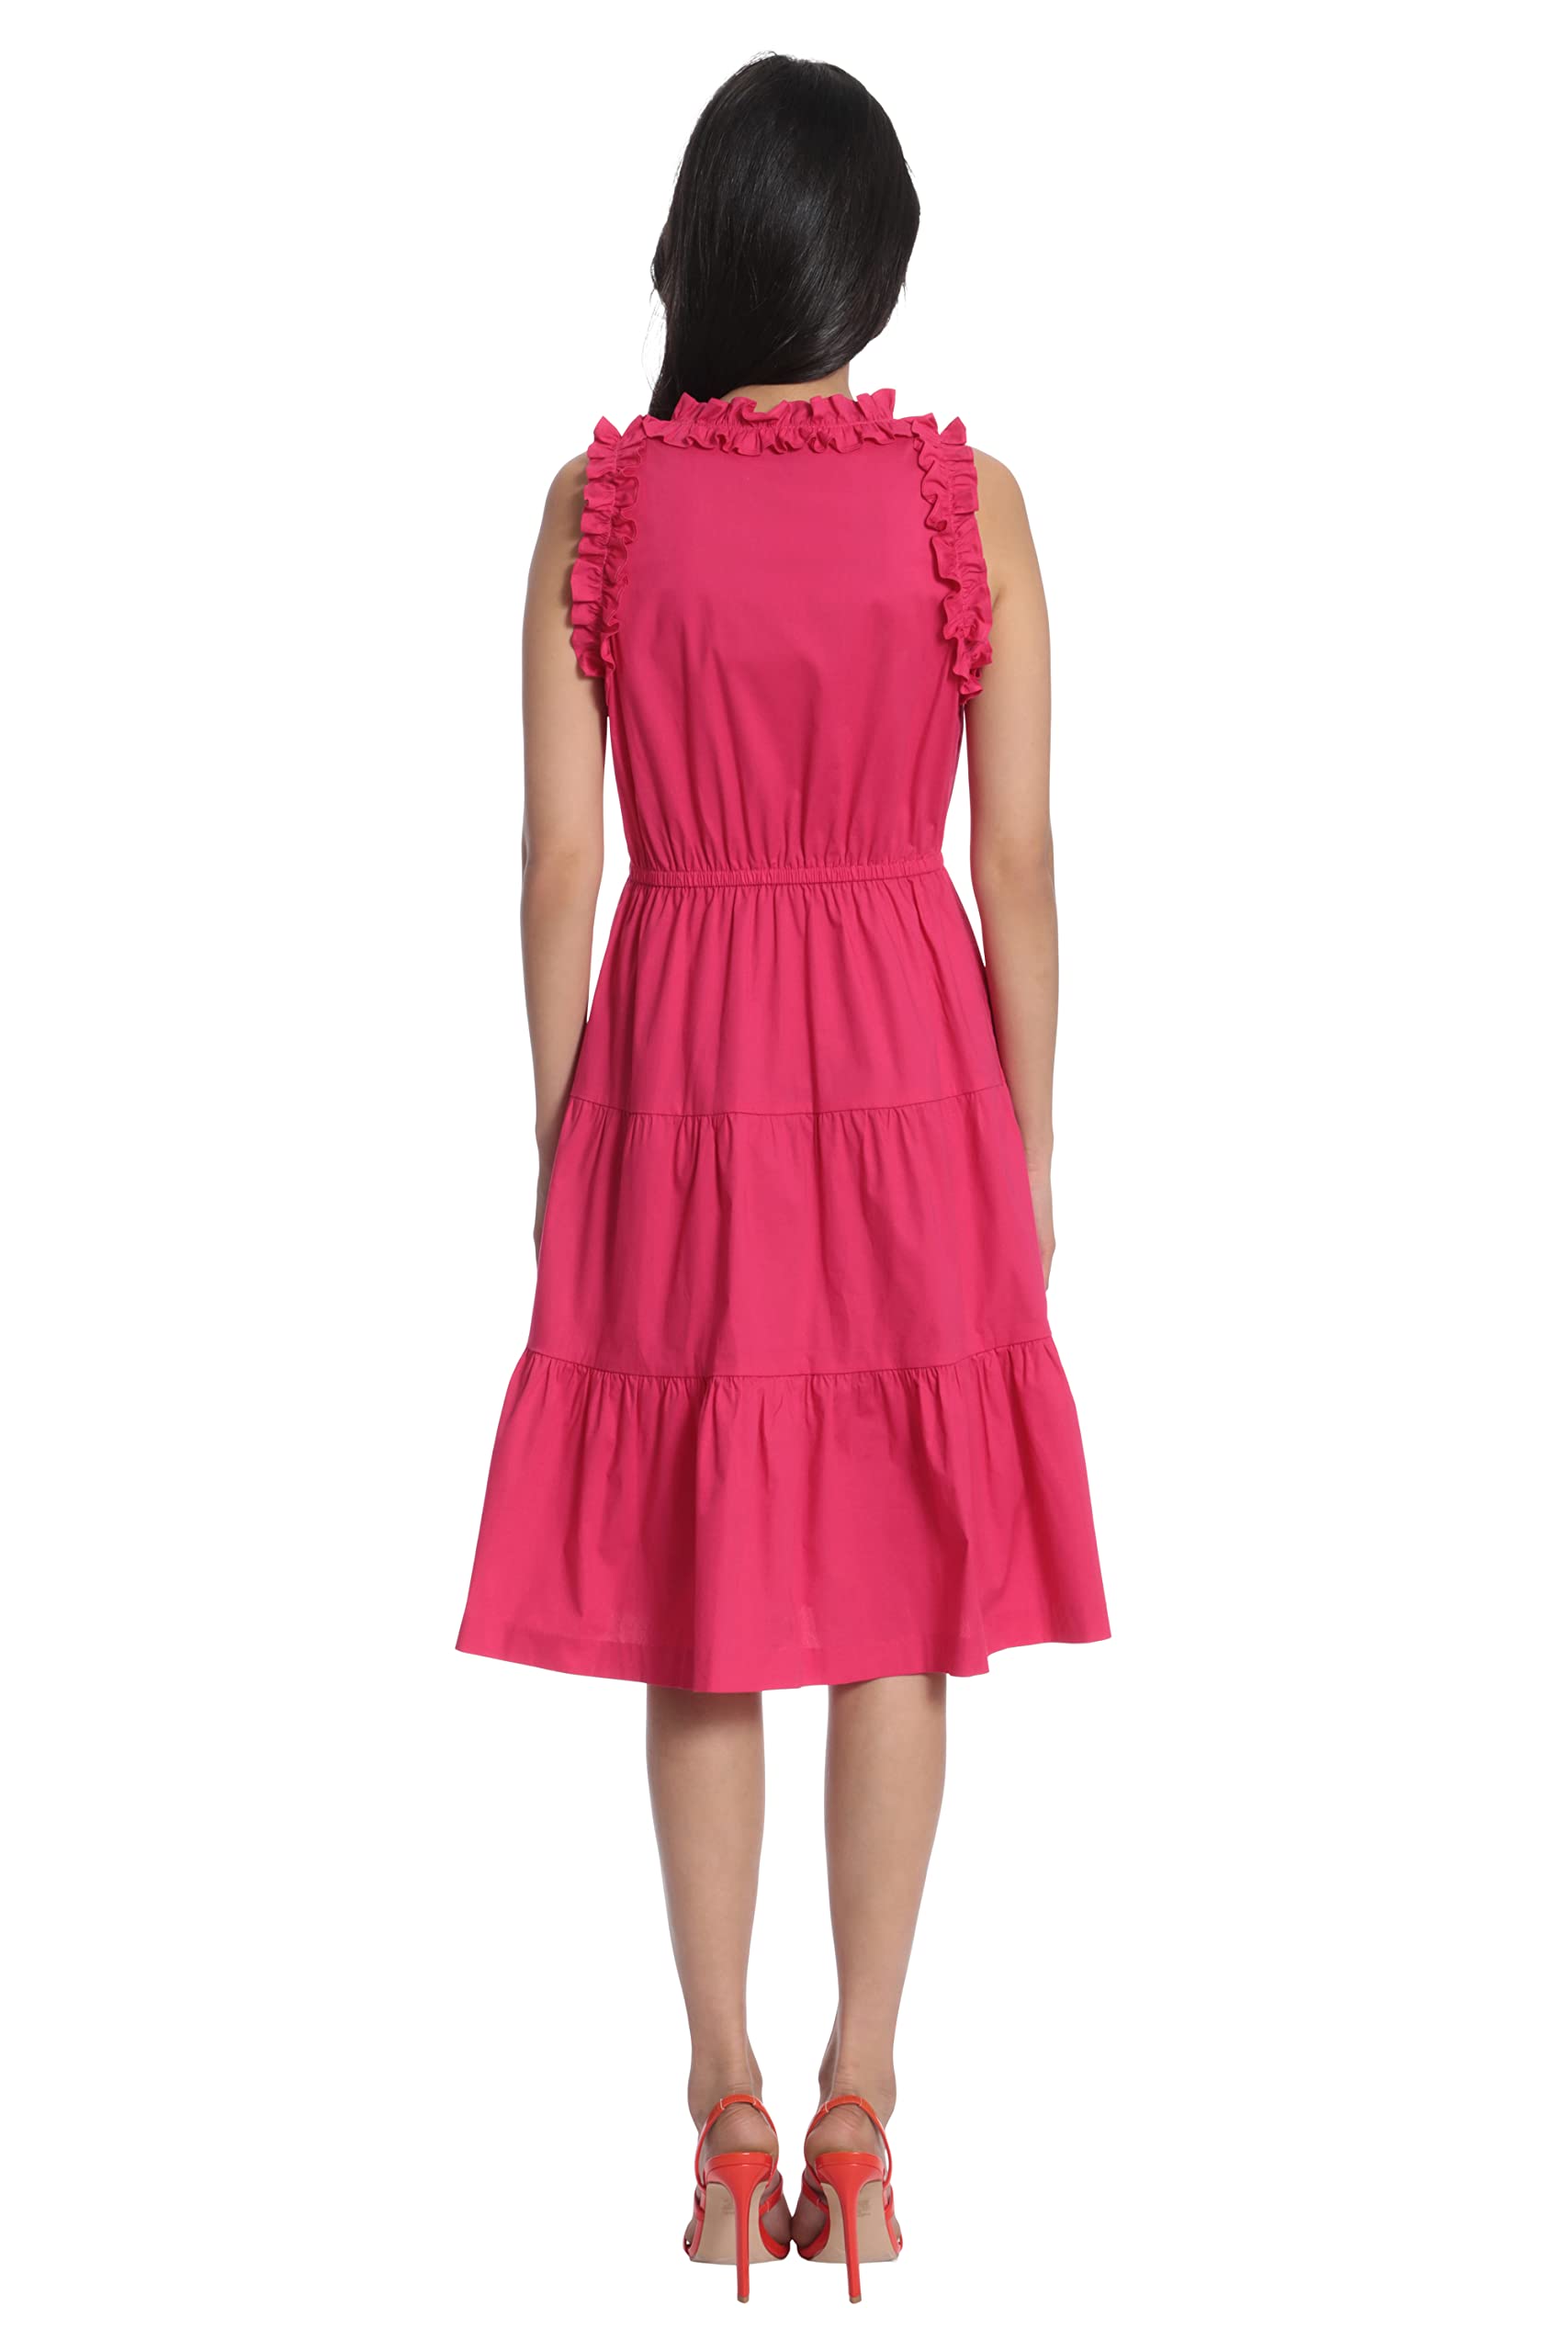 Maggy London Women's V-Neck Tiered Skirt Dress with Tie and Ruffle Details